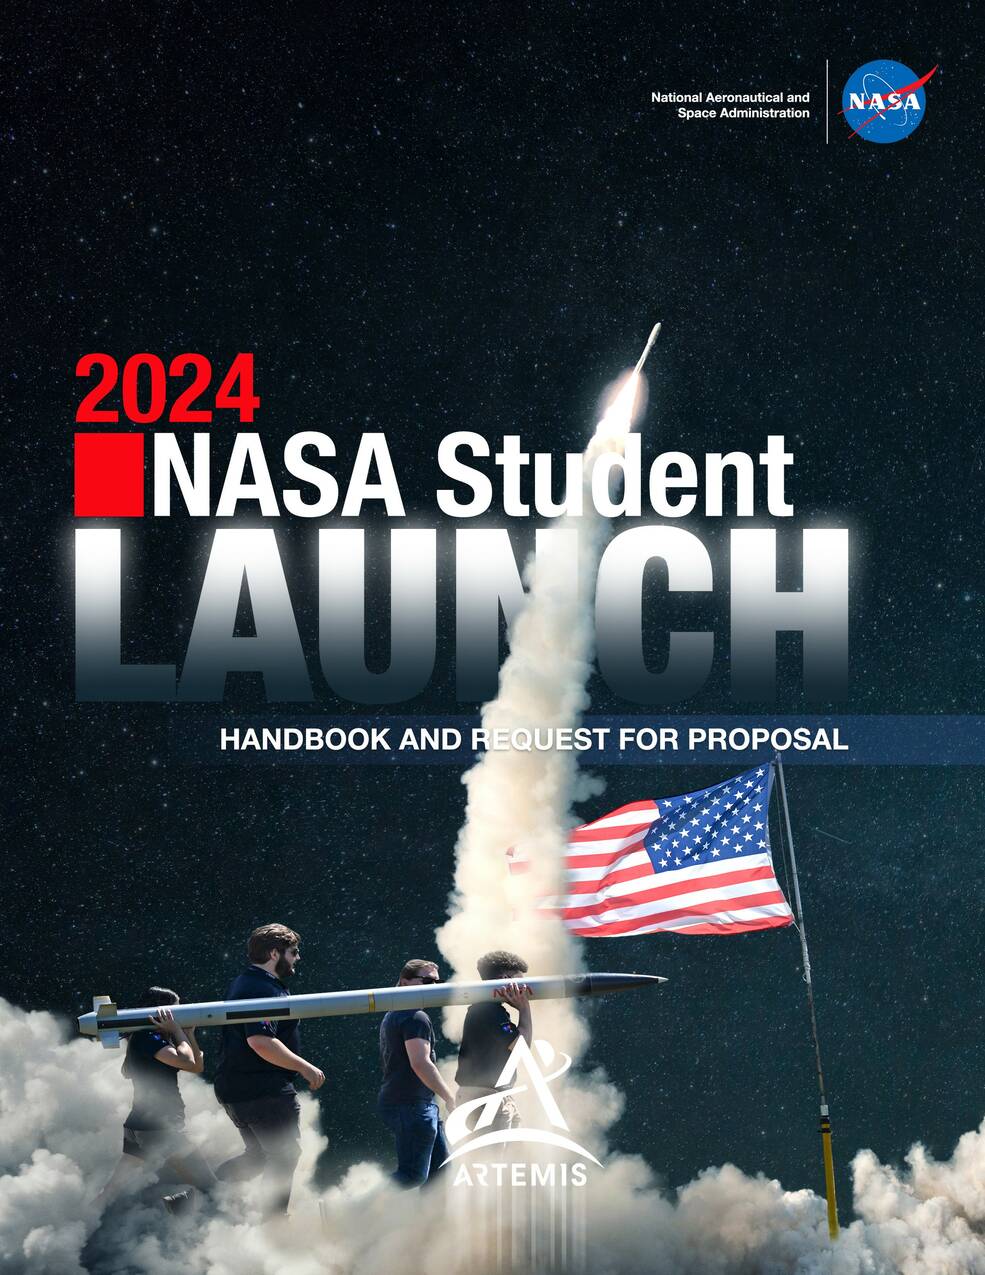 The 2024 Cover of the NASA Student Launch Handbook Cover.